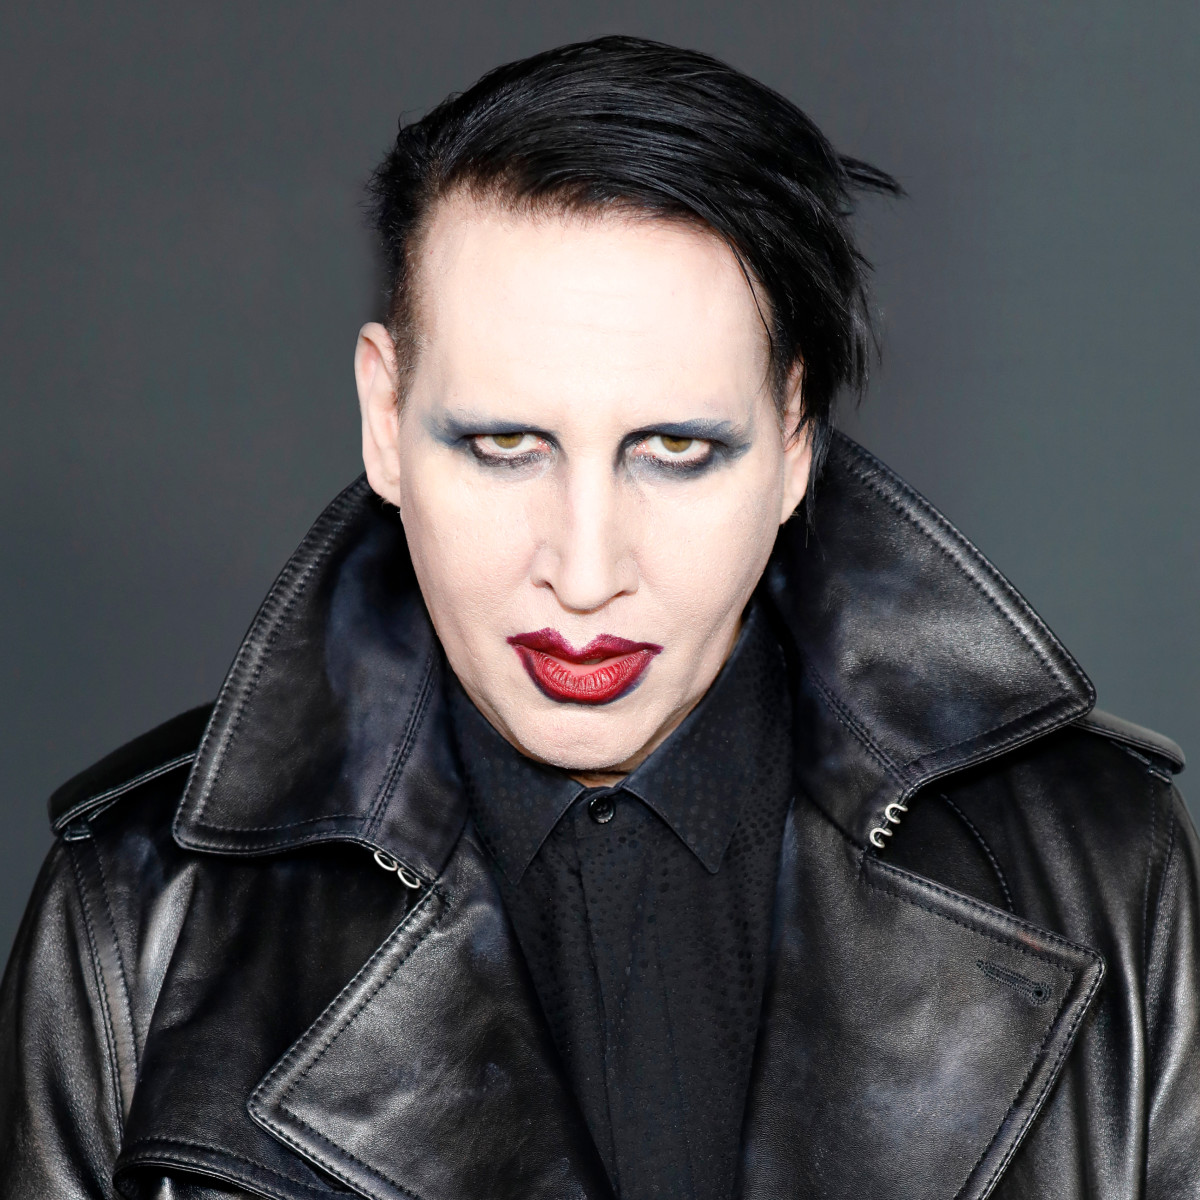 List of awards and nominations received by Marilyn Manson - Wikipedia